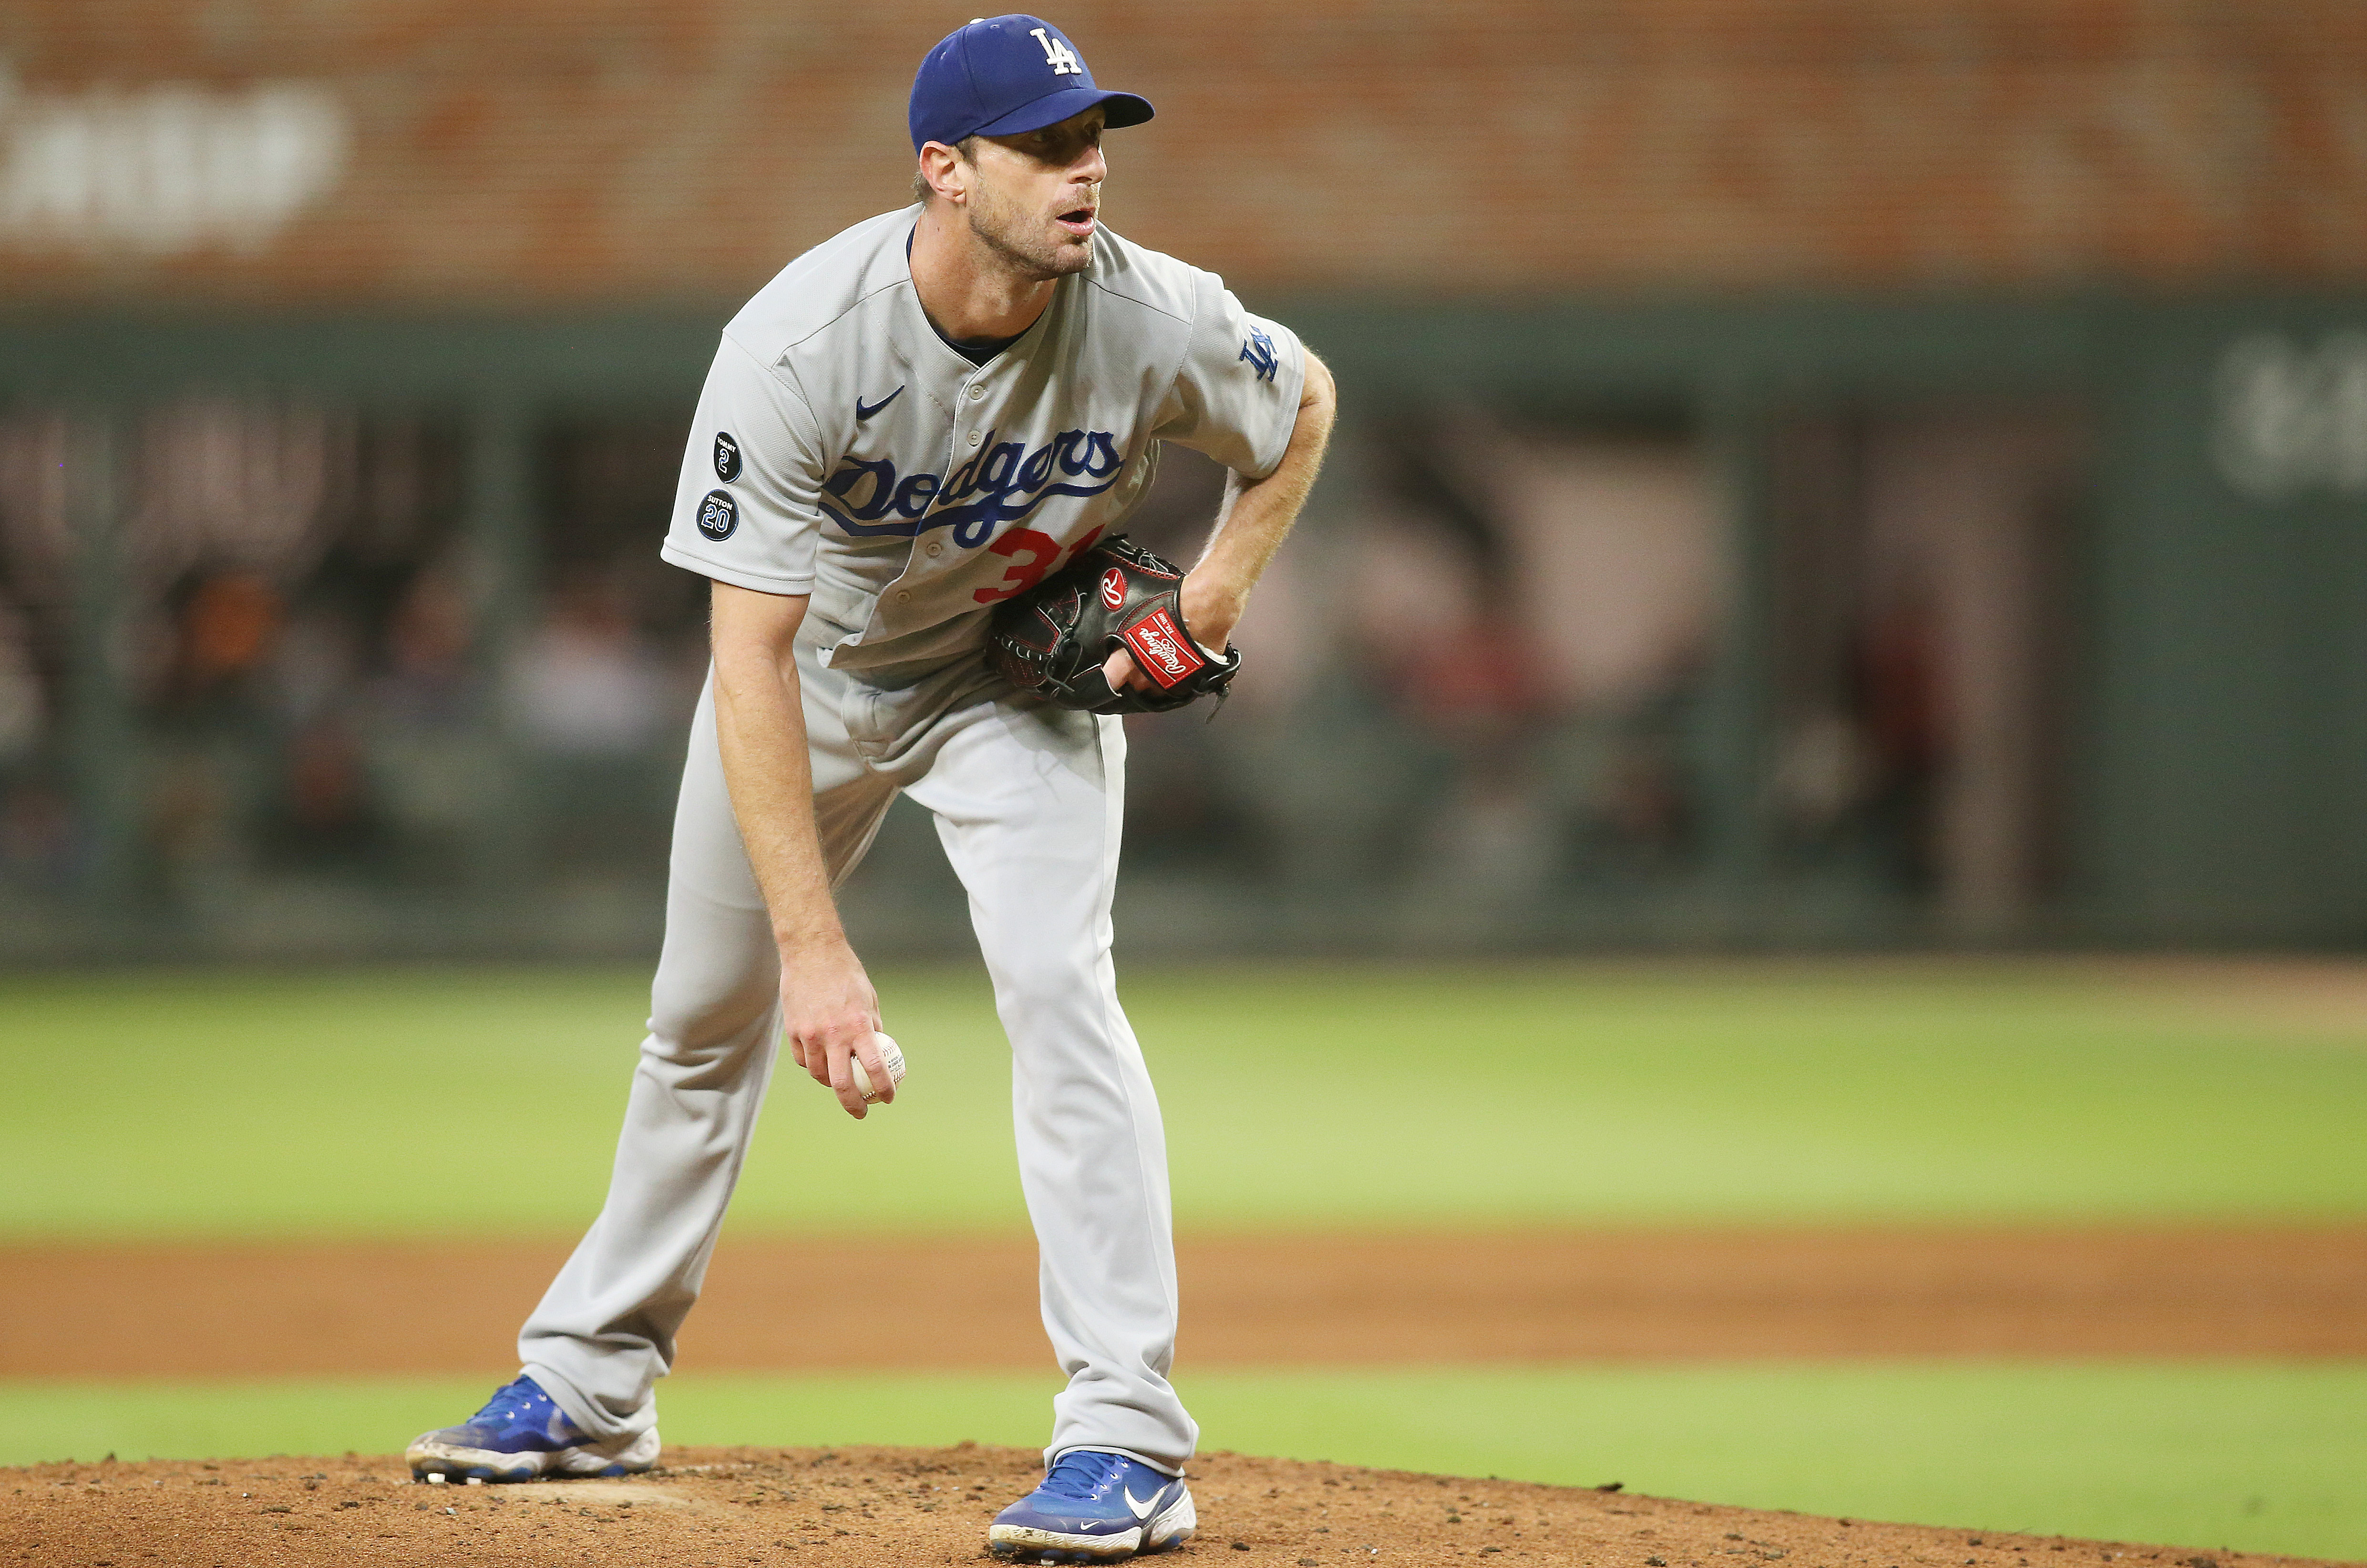 Los Angeles Dodgers starting pitcher Max Scherzer (31) looks for the pitch against the Atlanta Braves during the second inning in game two of the 2021 NLCS at Truist Park.